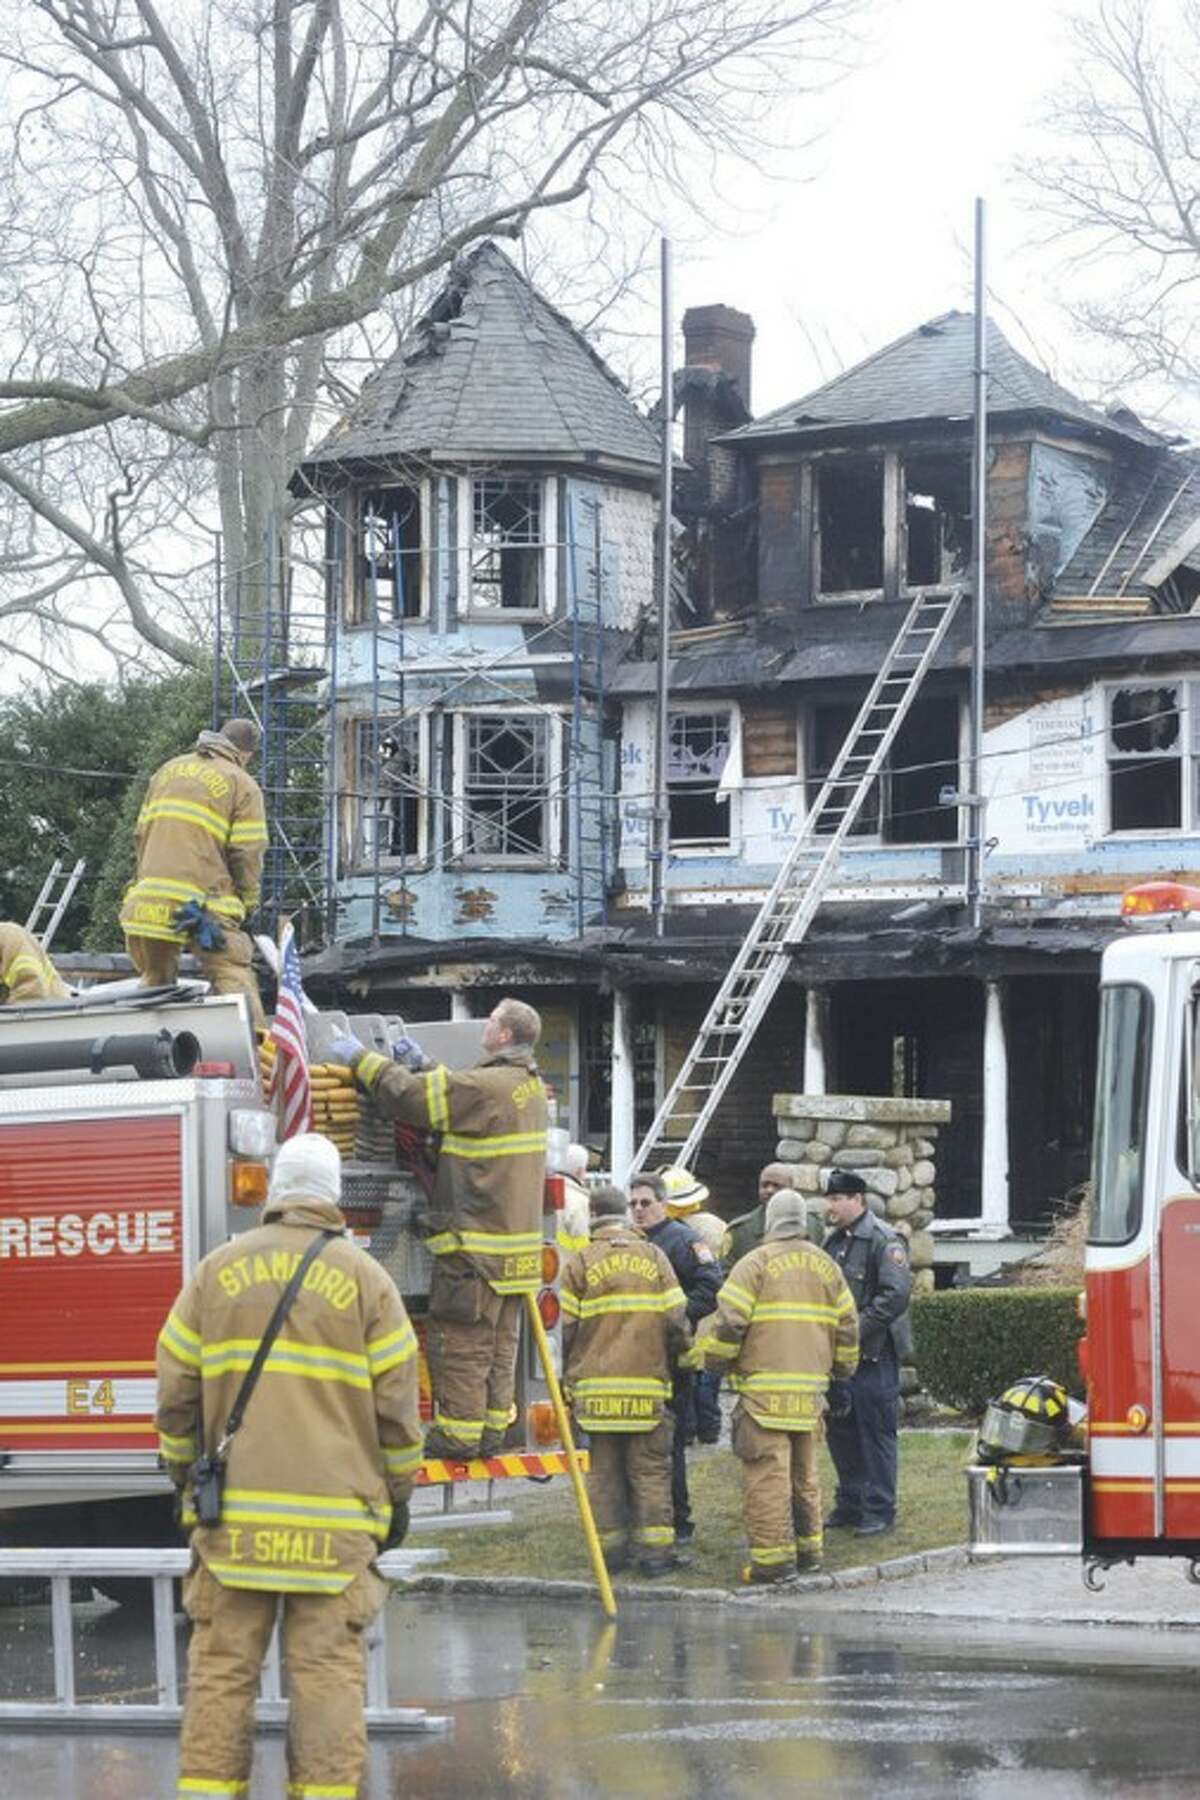 File Photo / Matthew Vinci. Stamford Fire & Rescue teams work outside of a home at 2267 Shippan Ave. in Stamford after a fire broke out Christmas Day 2011, killing five occupants.